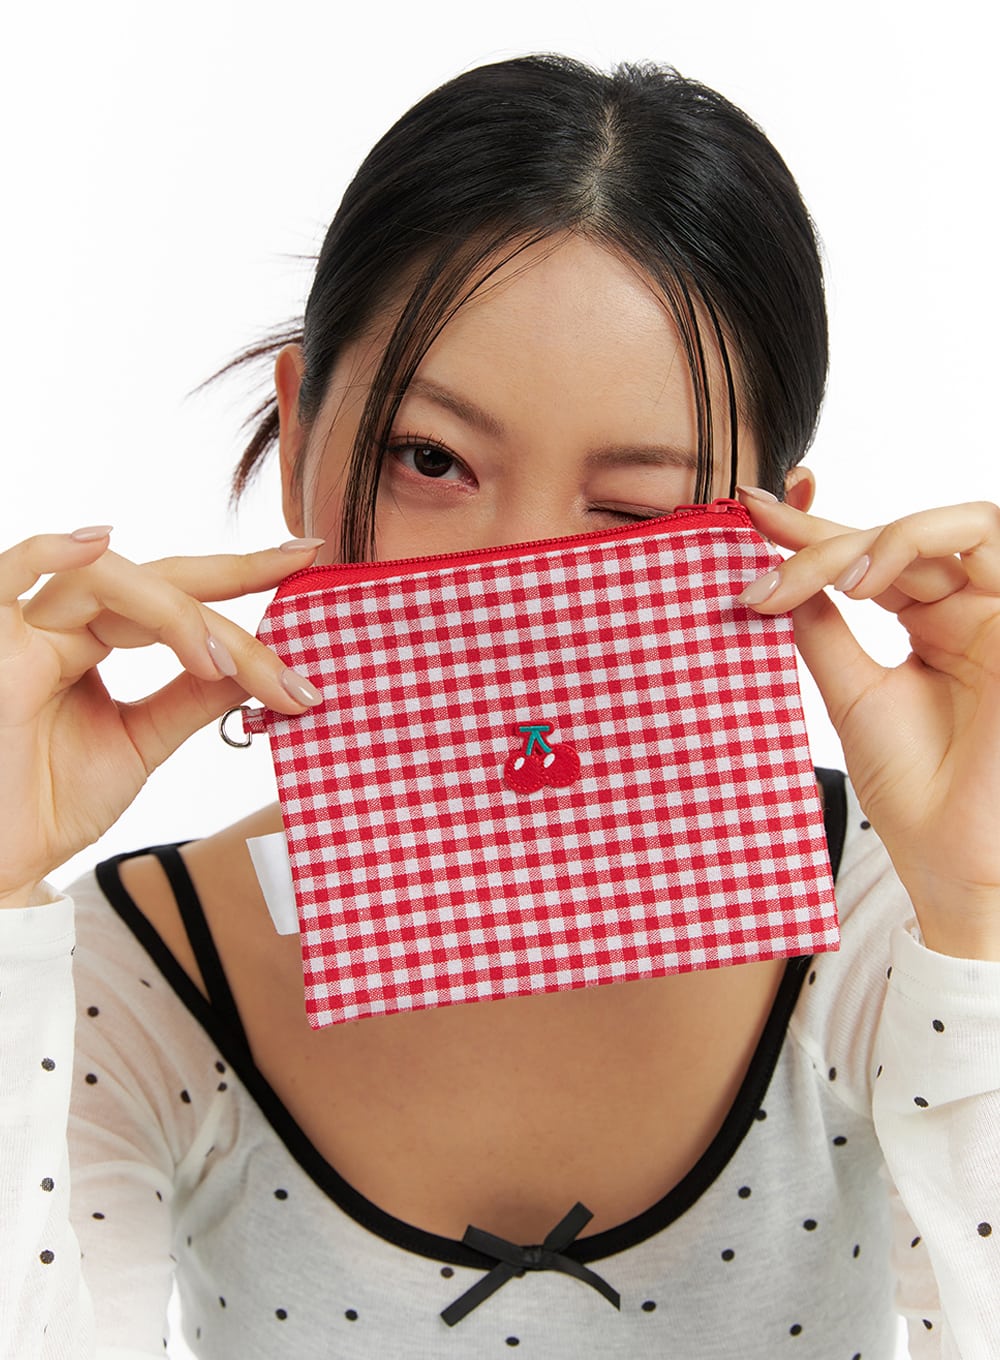 cherry-embroidered-gingham-pouch-if421